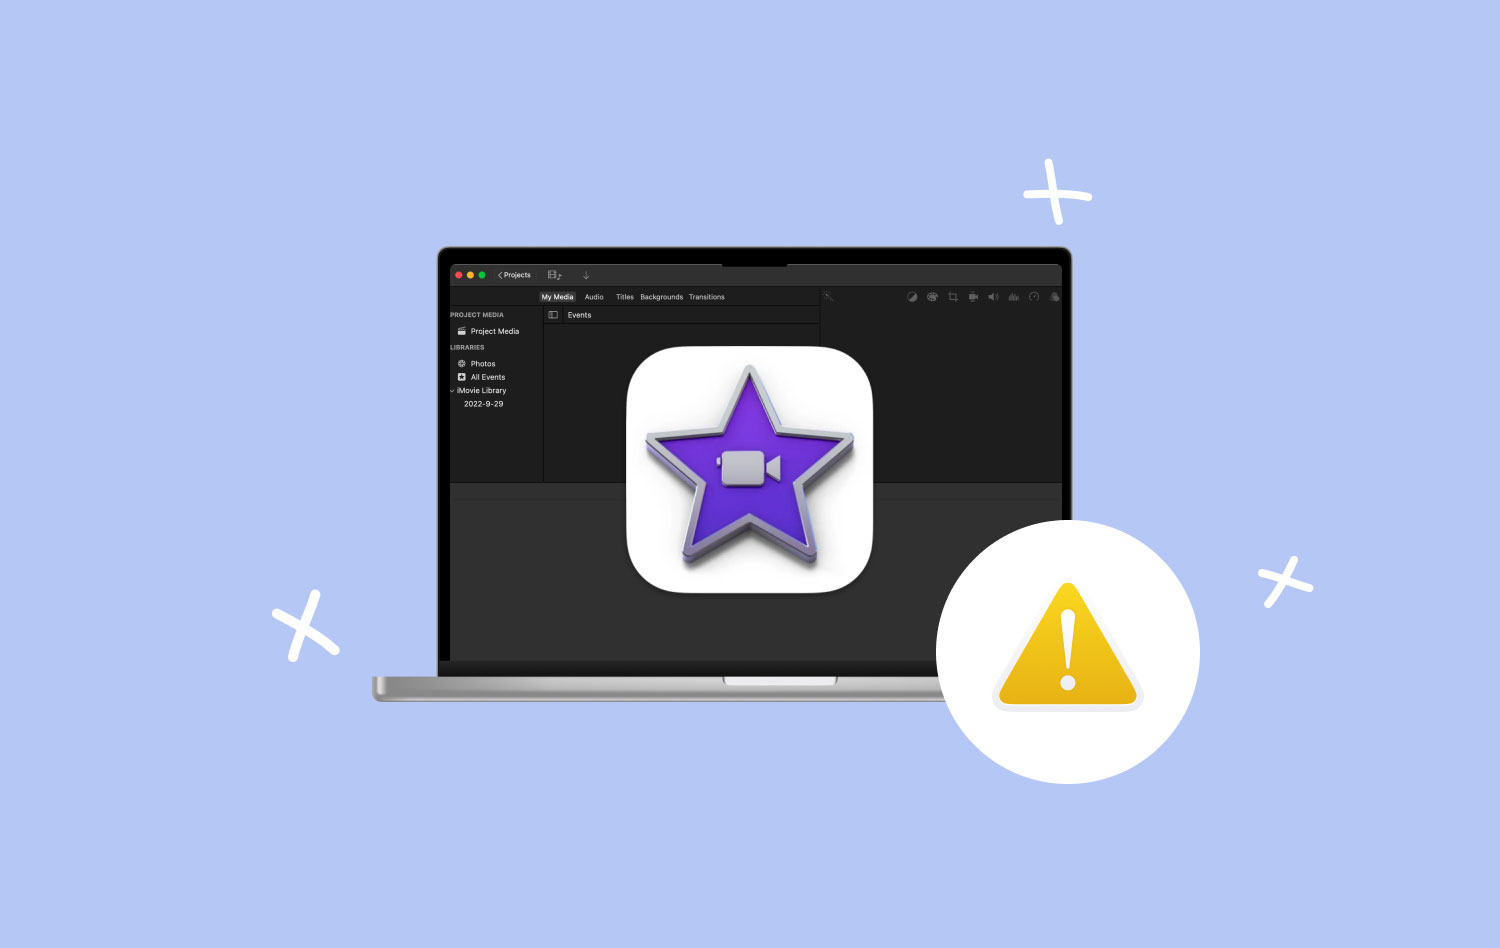 Fix iMovie Not Enough Disk Space Error